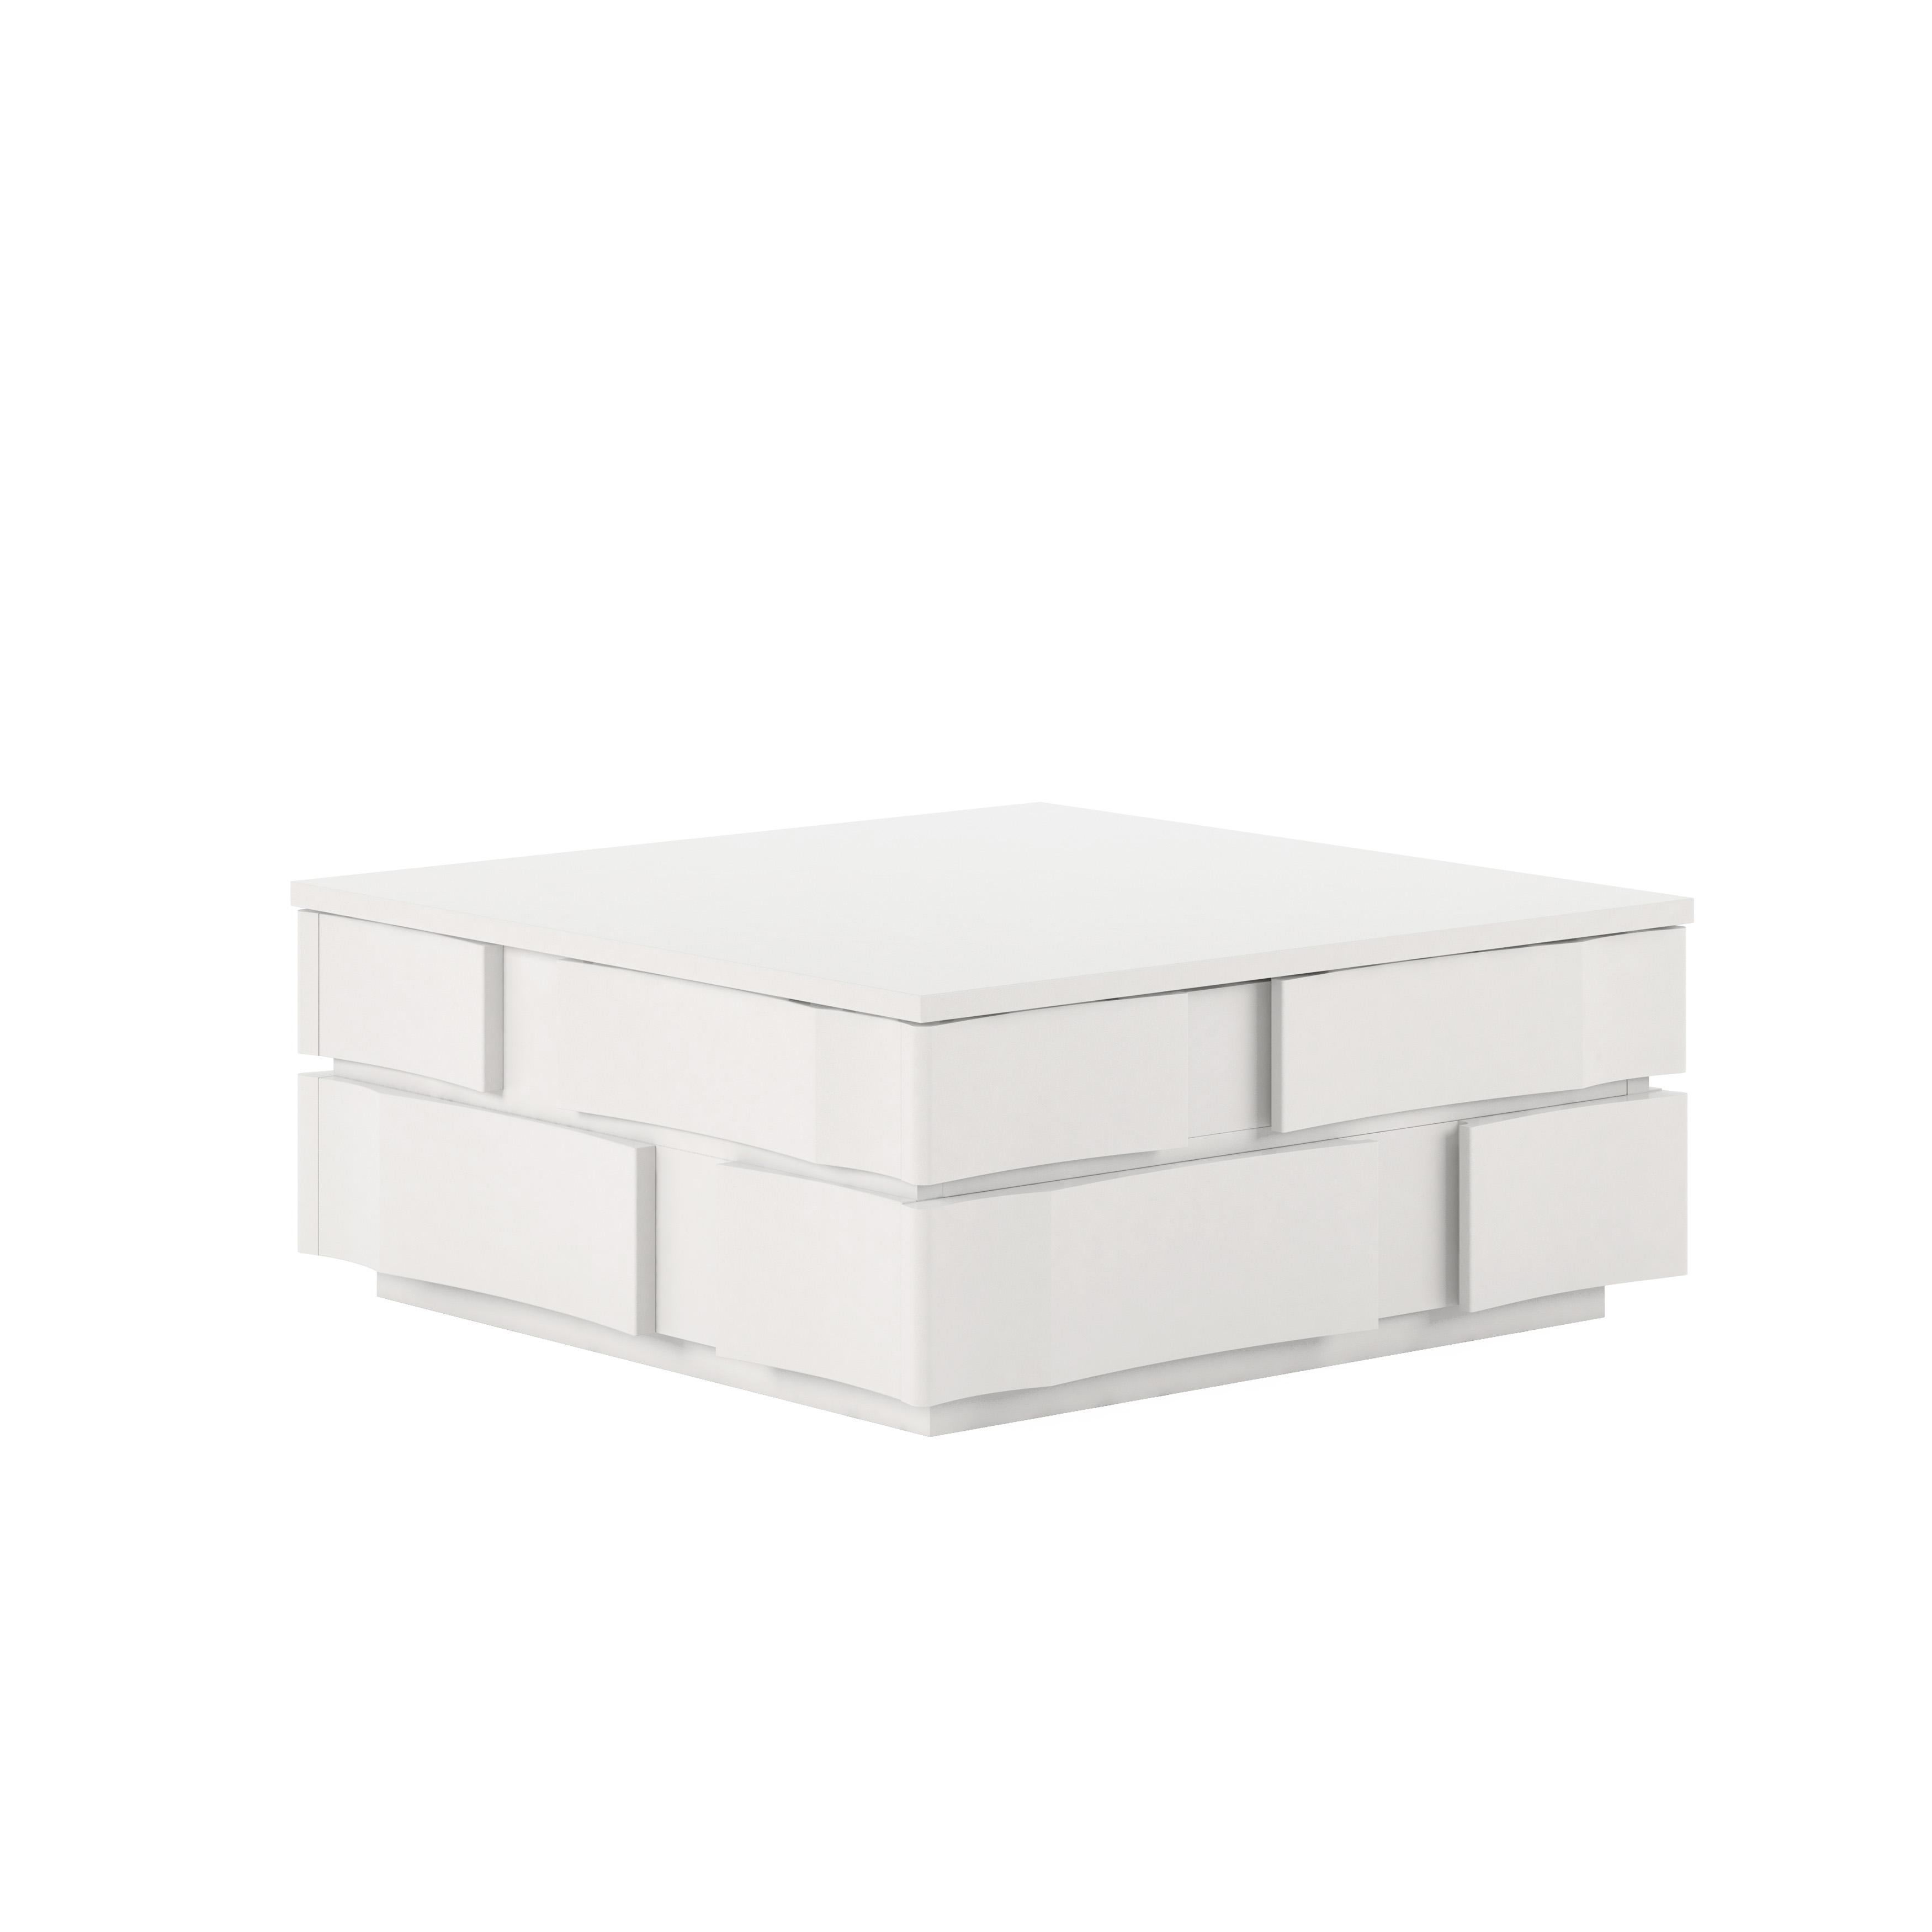 Traditional, Casual Coffee Table Portico 323301-3317 in White 